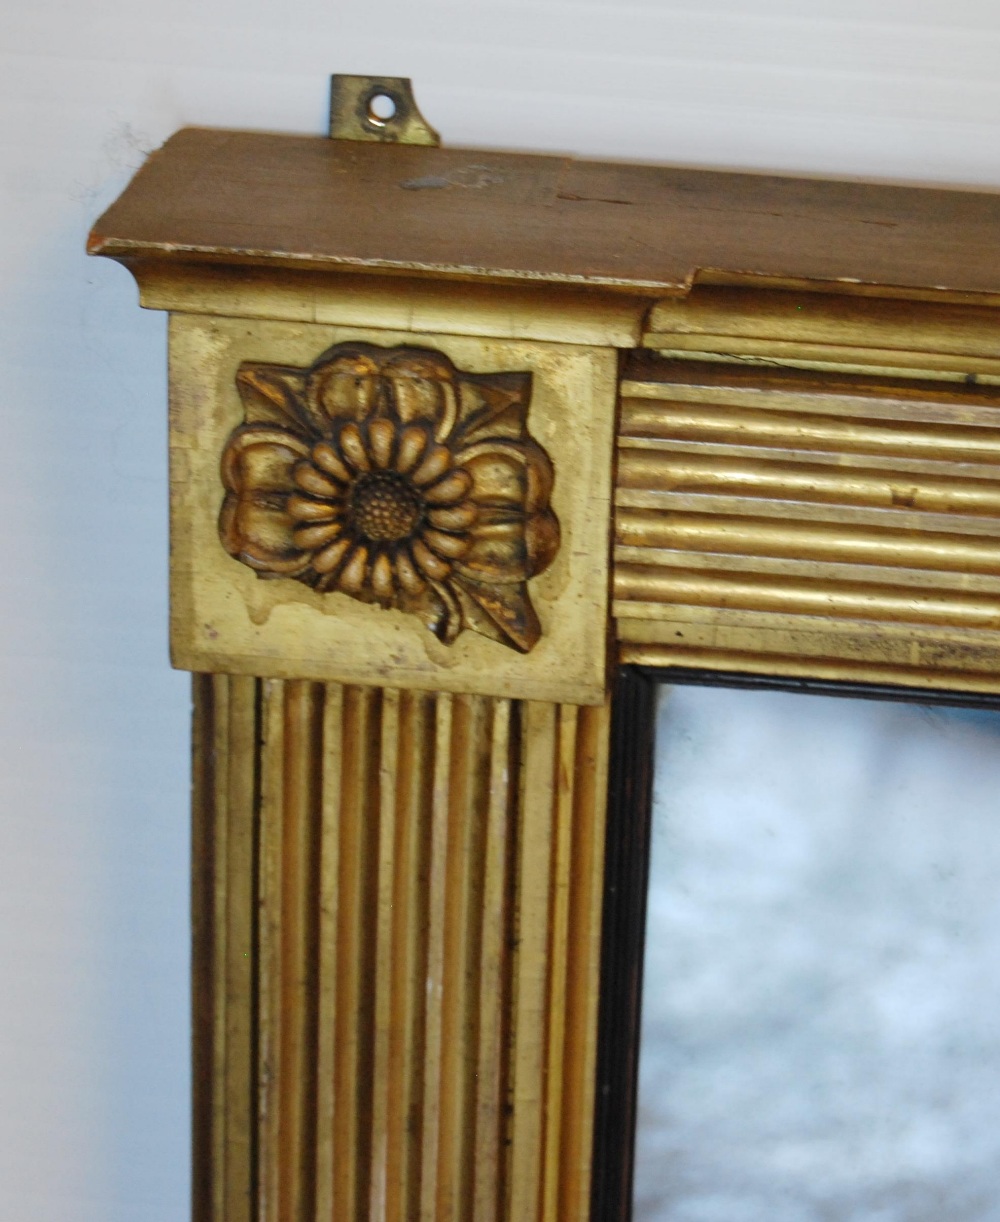 Early 19th century Regency-style giltwood overmantel mirror with reeded decoration and flowerhead - Image 2 of 6